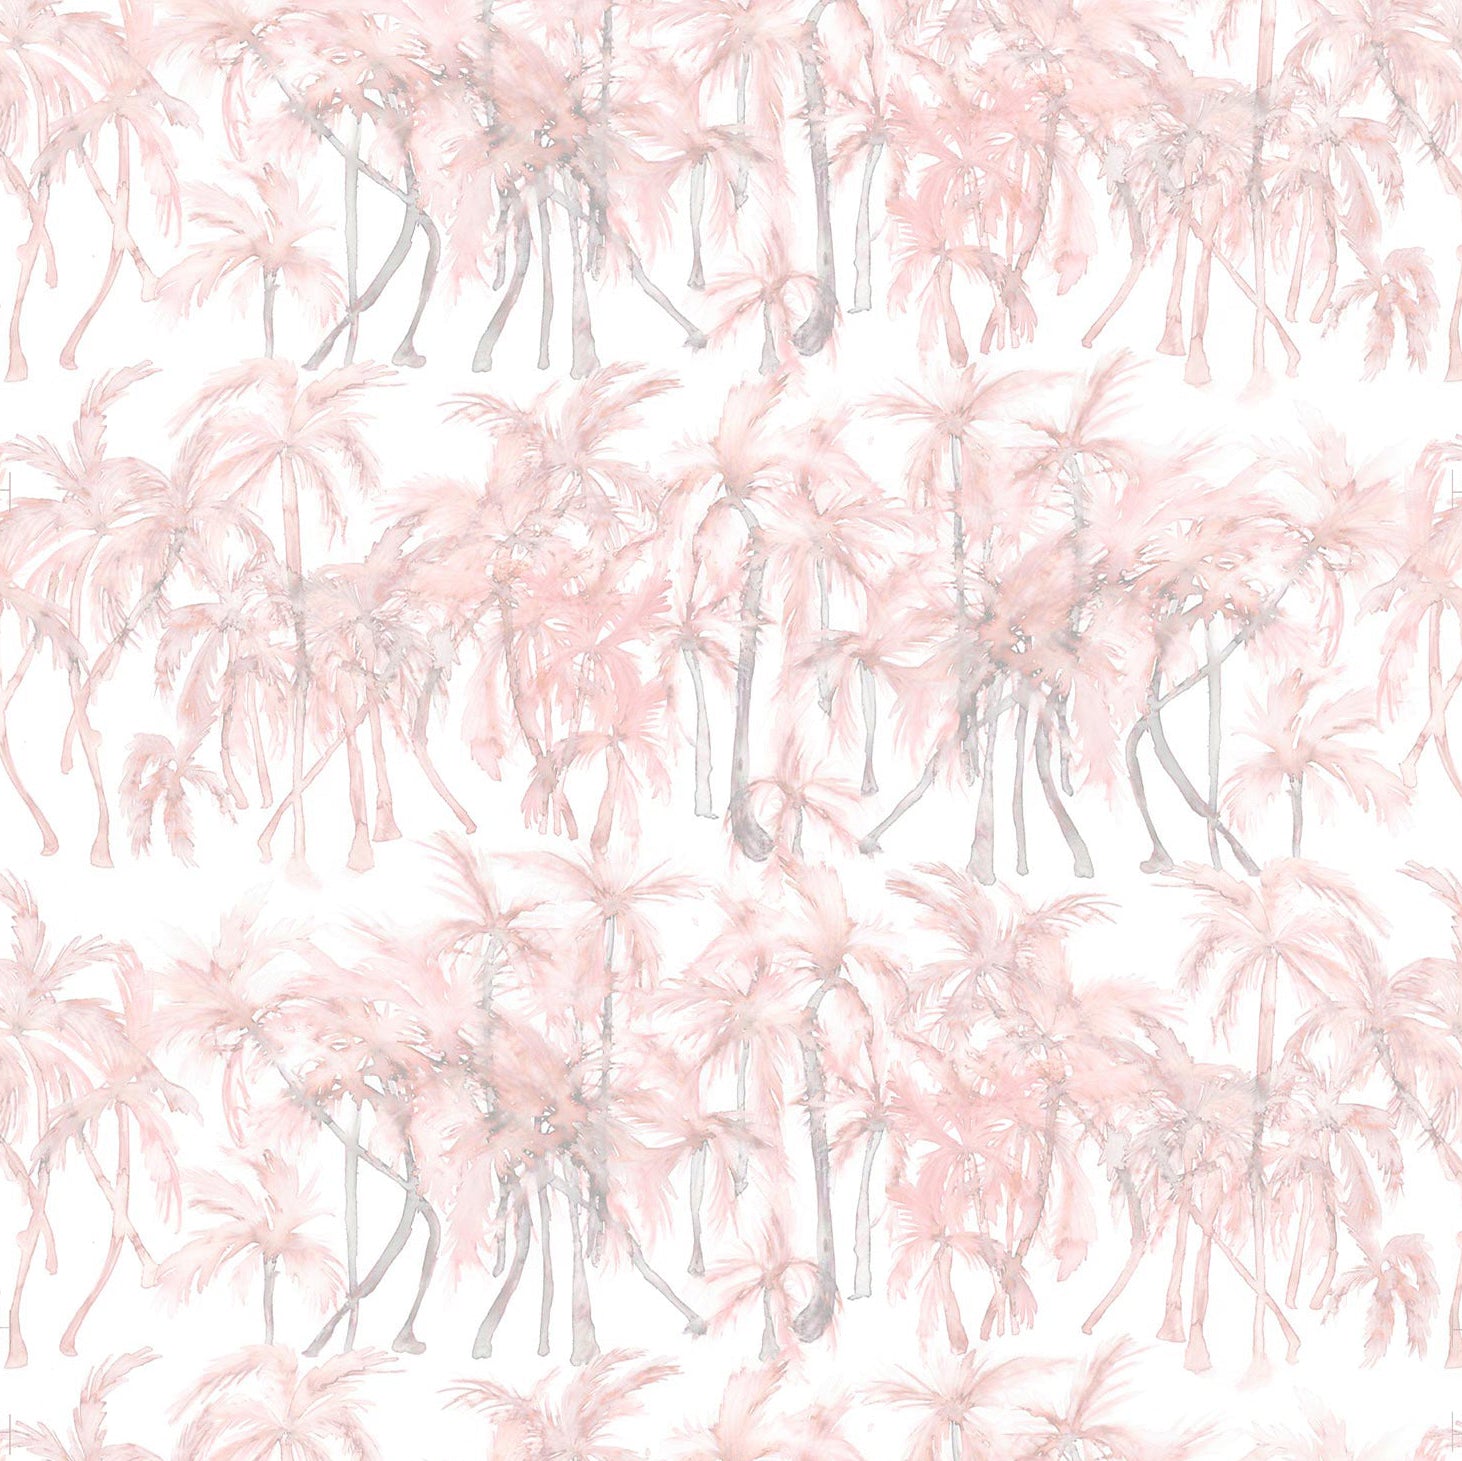 Detail of wallpaper in a painterly palm tree stripe print in shades of pink and gray on a white field.